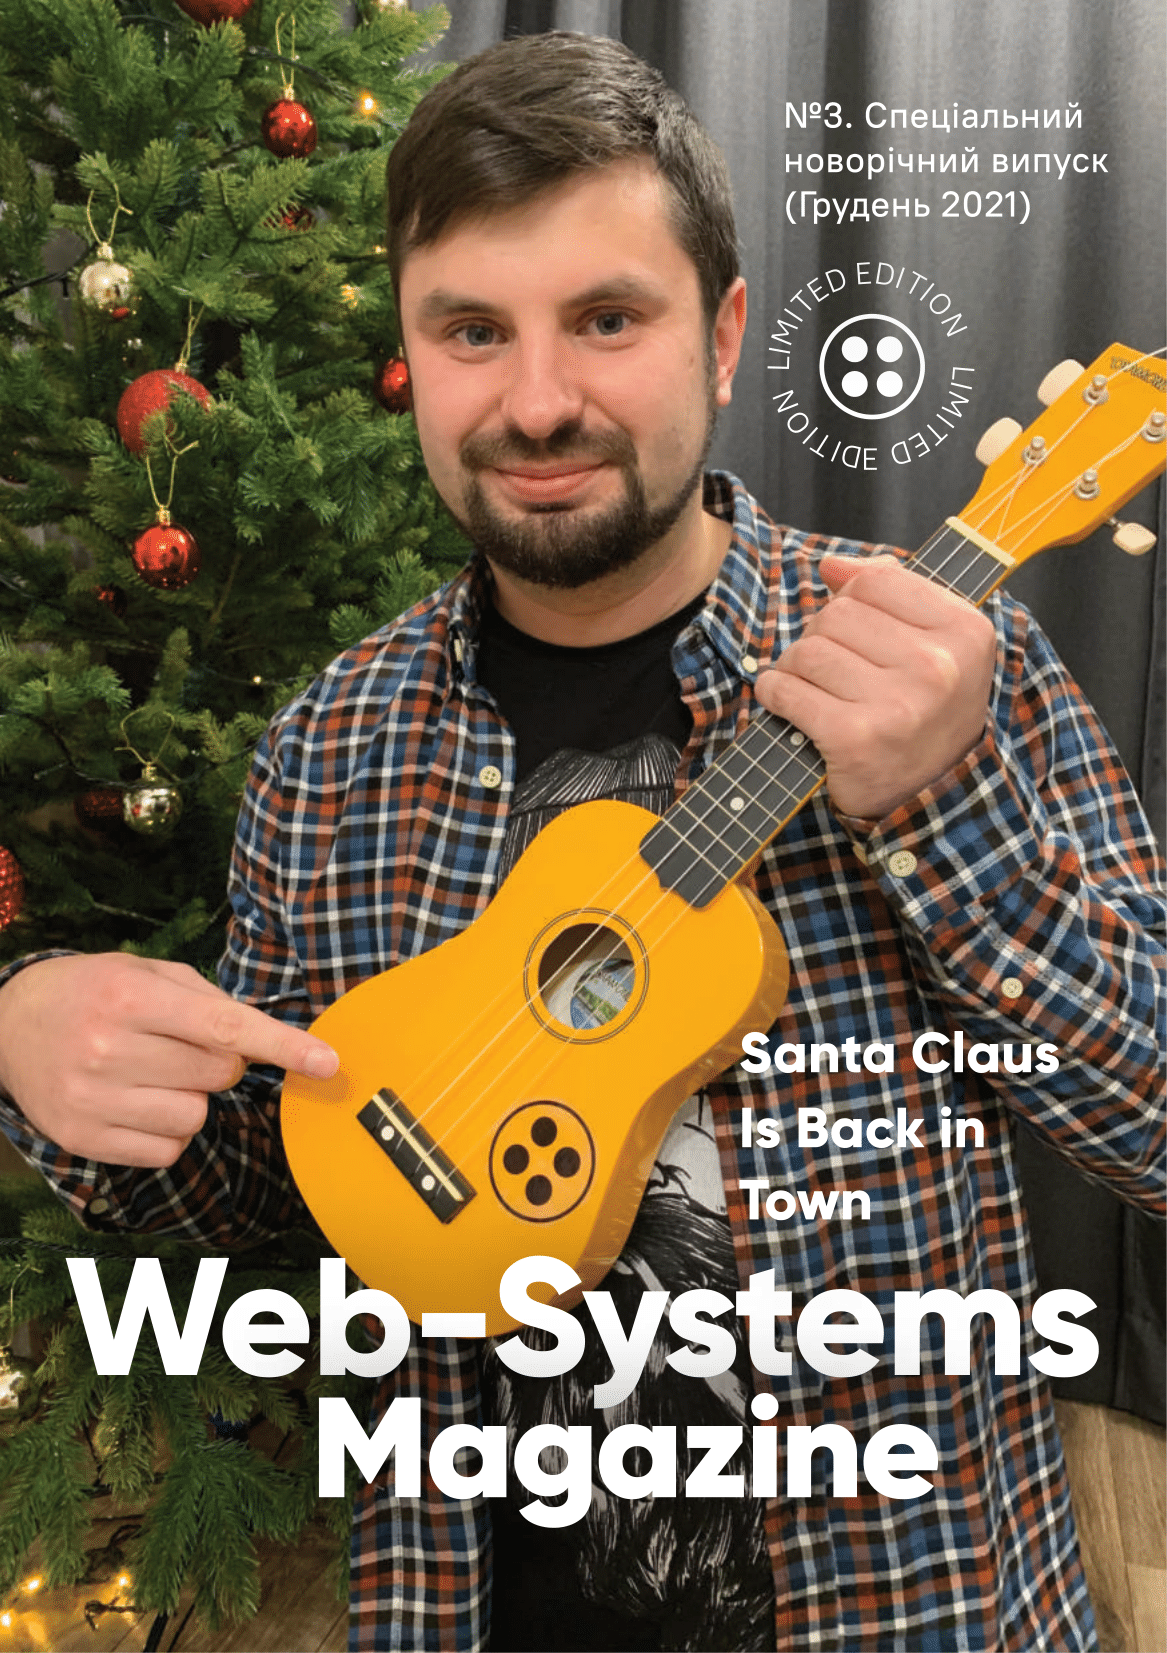 Web-Systems Magazine. Santa Claus is Back in Town.